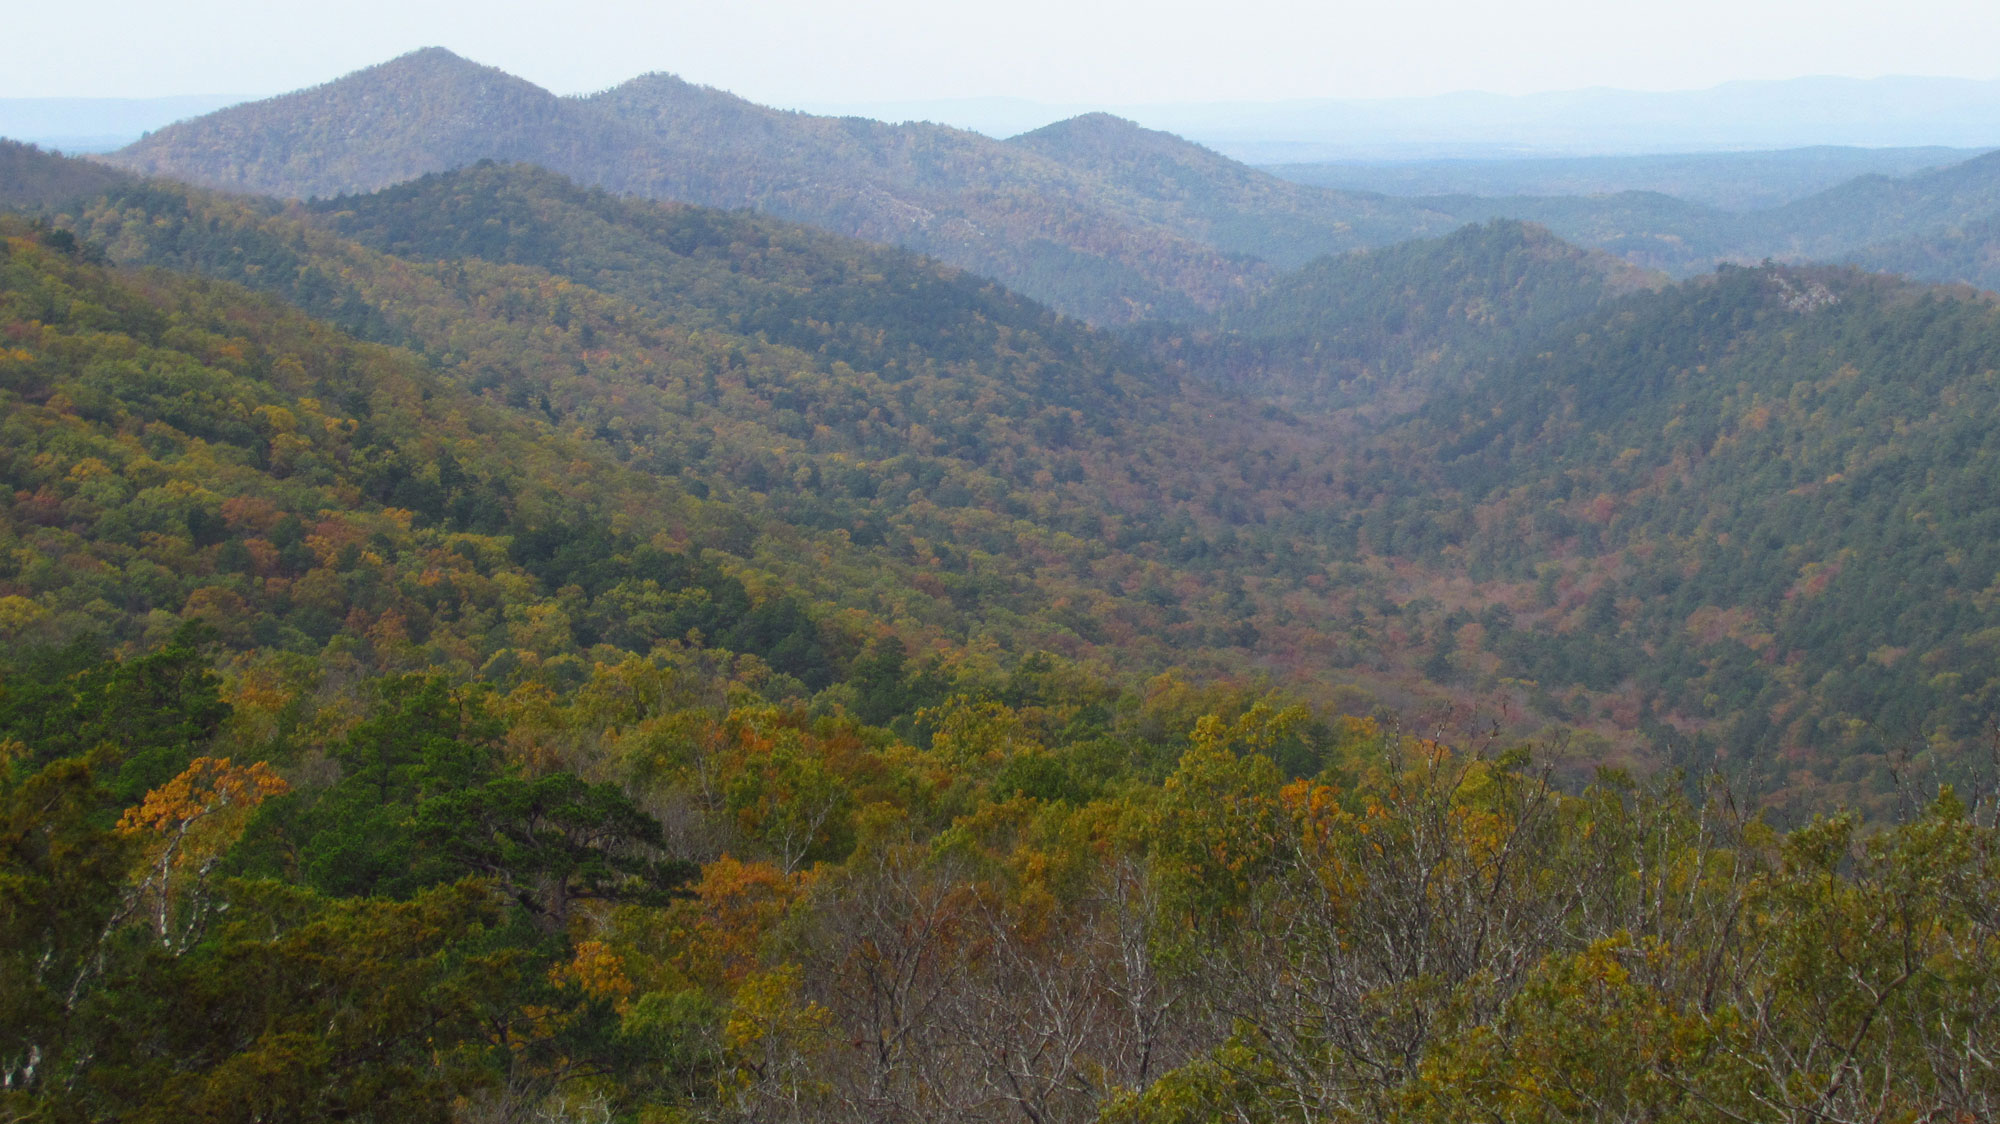 Photo of the Ouachita Mountains, Arkansas. Photo shows rolling mountains covered with a mix of broadleaves and coniferous trees. Coloring of some of the leaves suggests that it is fall.